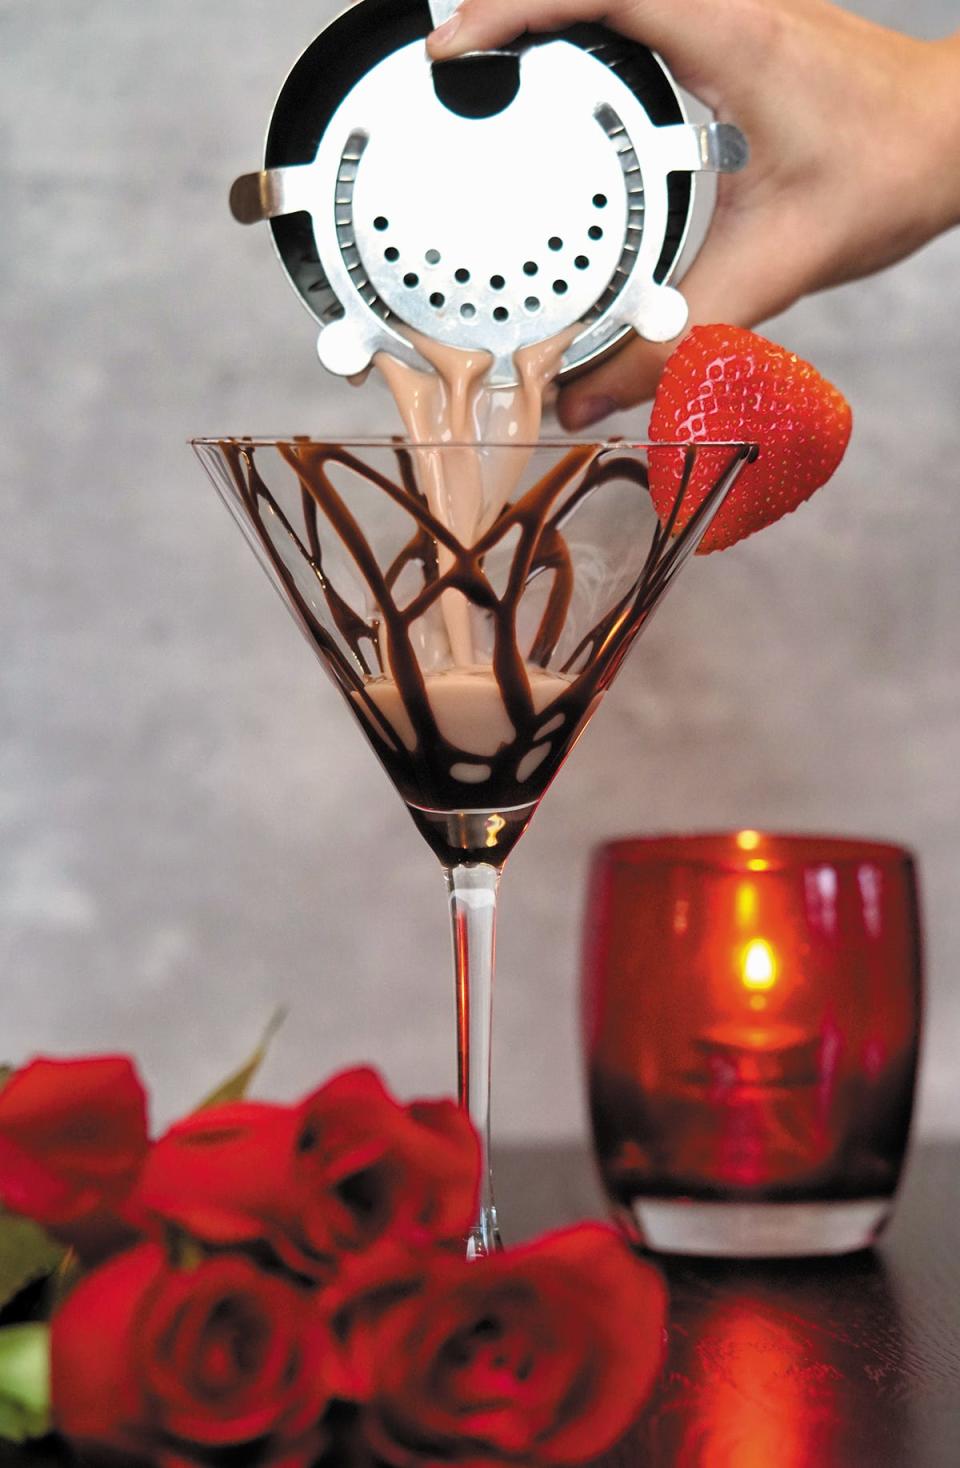 The "Chocolate Strawberry" cocktail is available at Prezzo the entire Valentine's Day weekend.